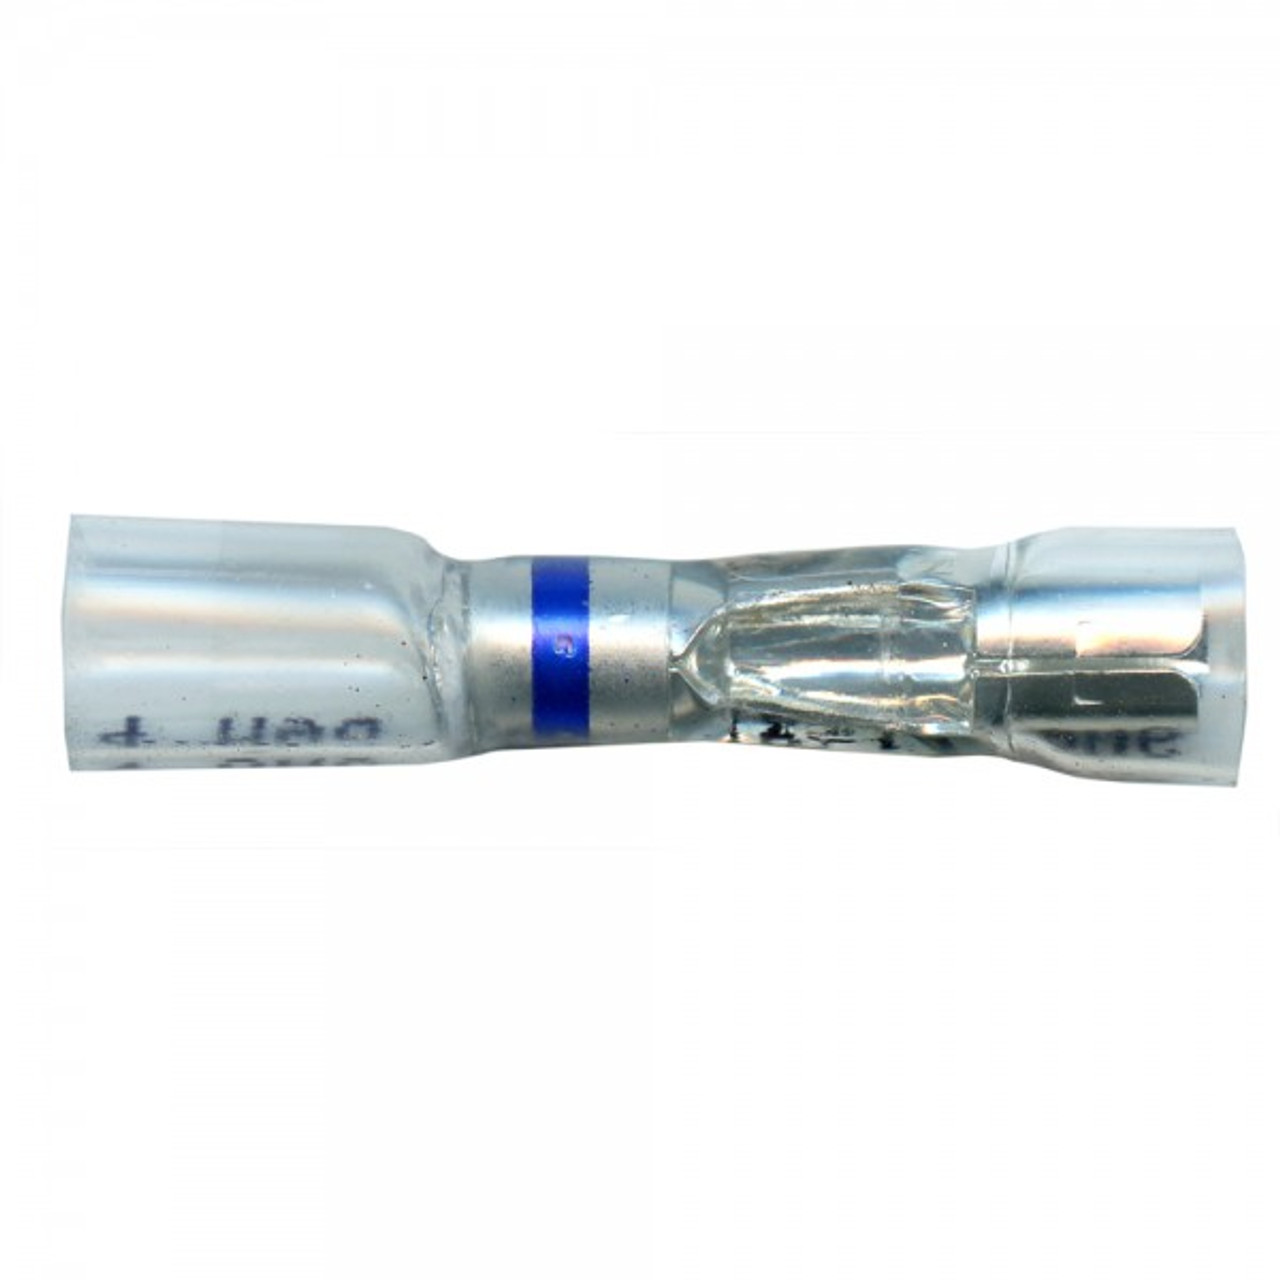 16 - 14 AWG Heat Shrinkable Bullet & Receptacle Connectors .180" @ 15 Pack - Clear w/Blue stripe  84-4448